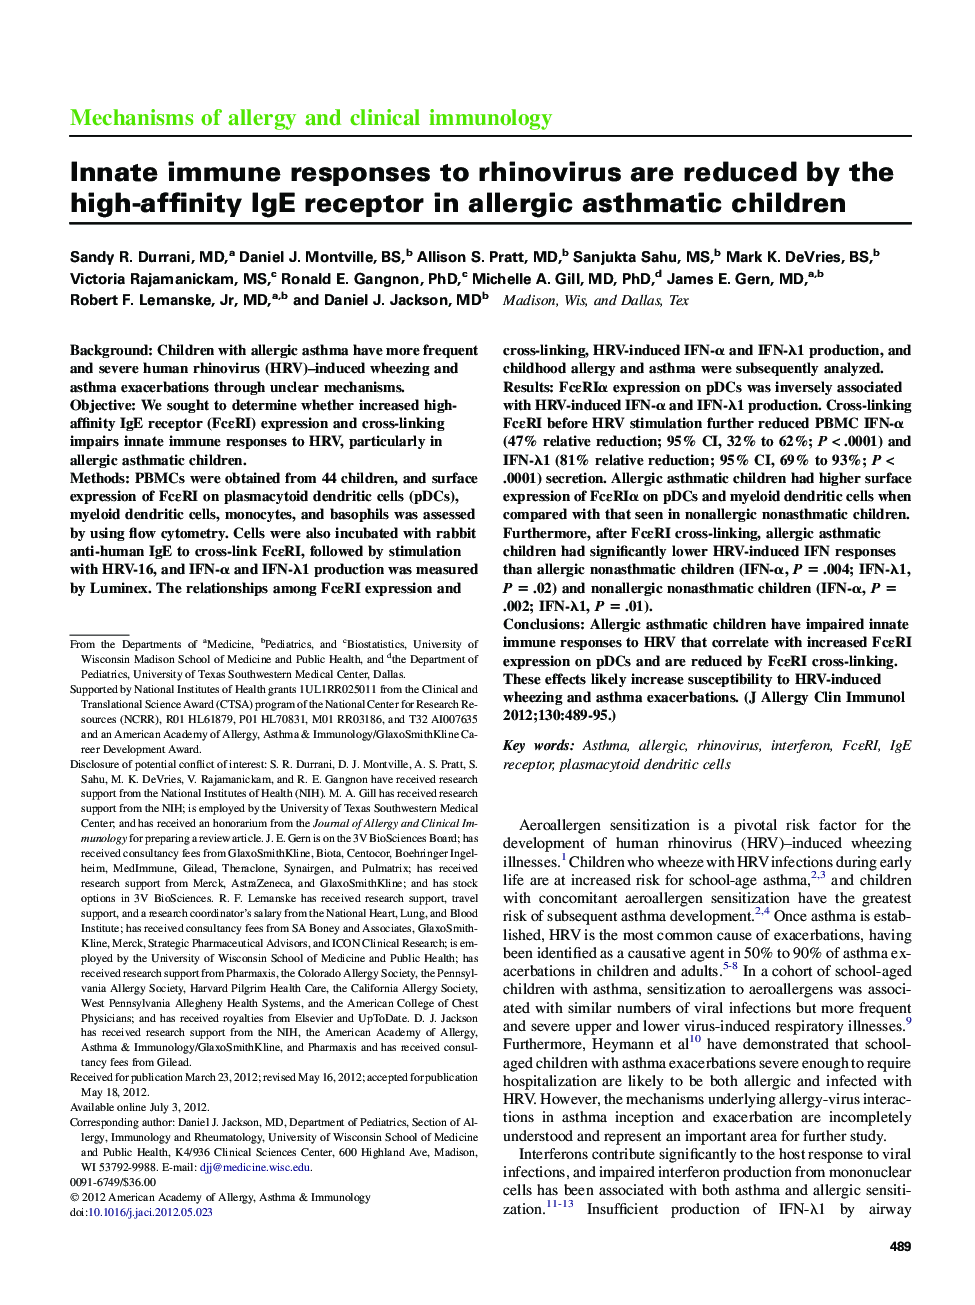 Innate immune responses to rhinovirus are reduced by the high-affinity IgE receptor in allergic asthmatic children 